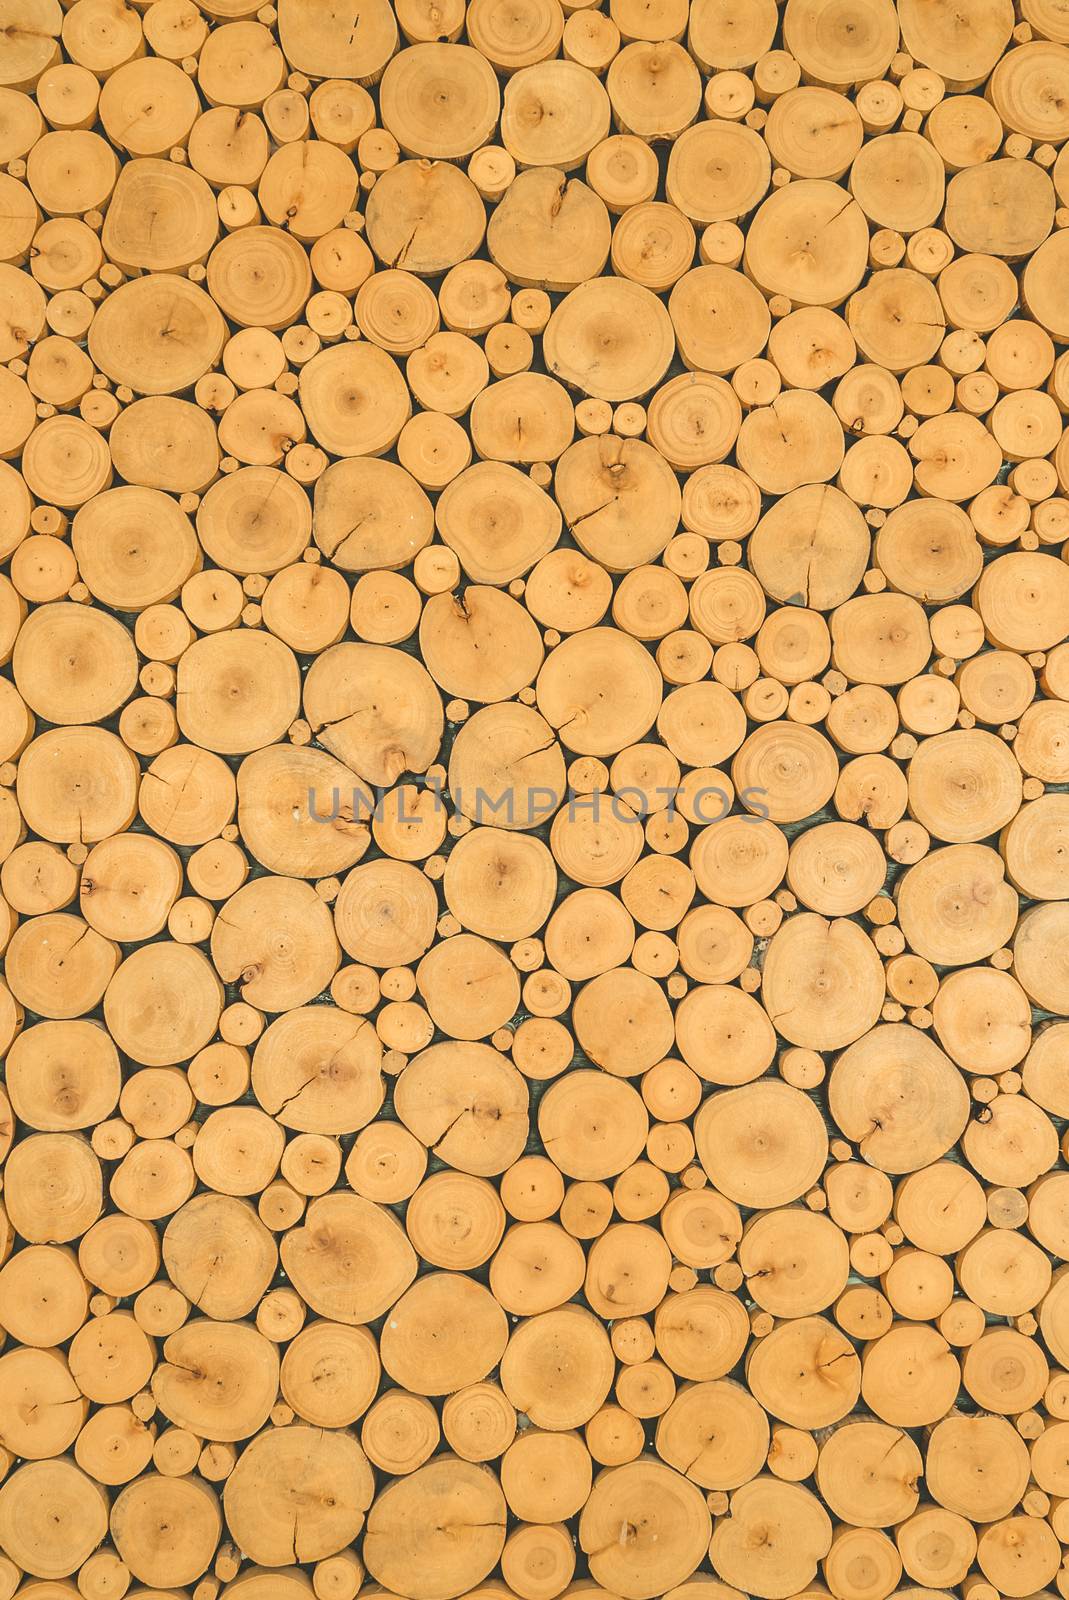 Wooden logs background